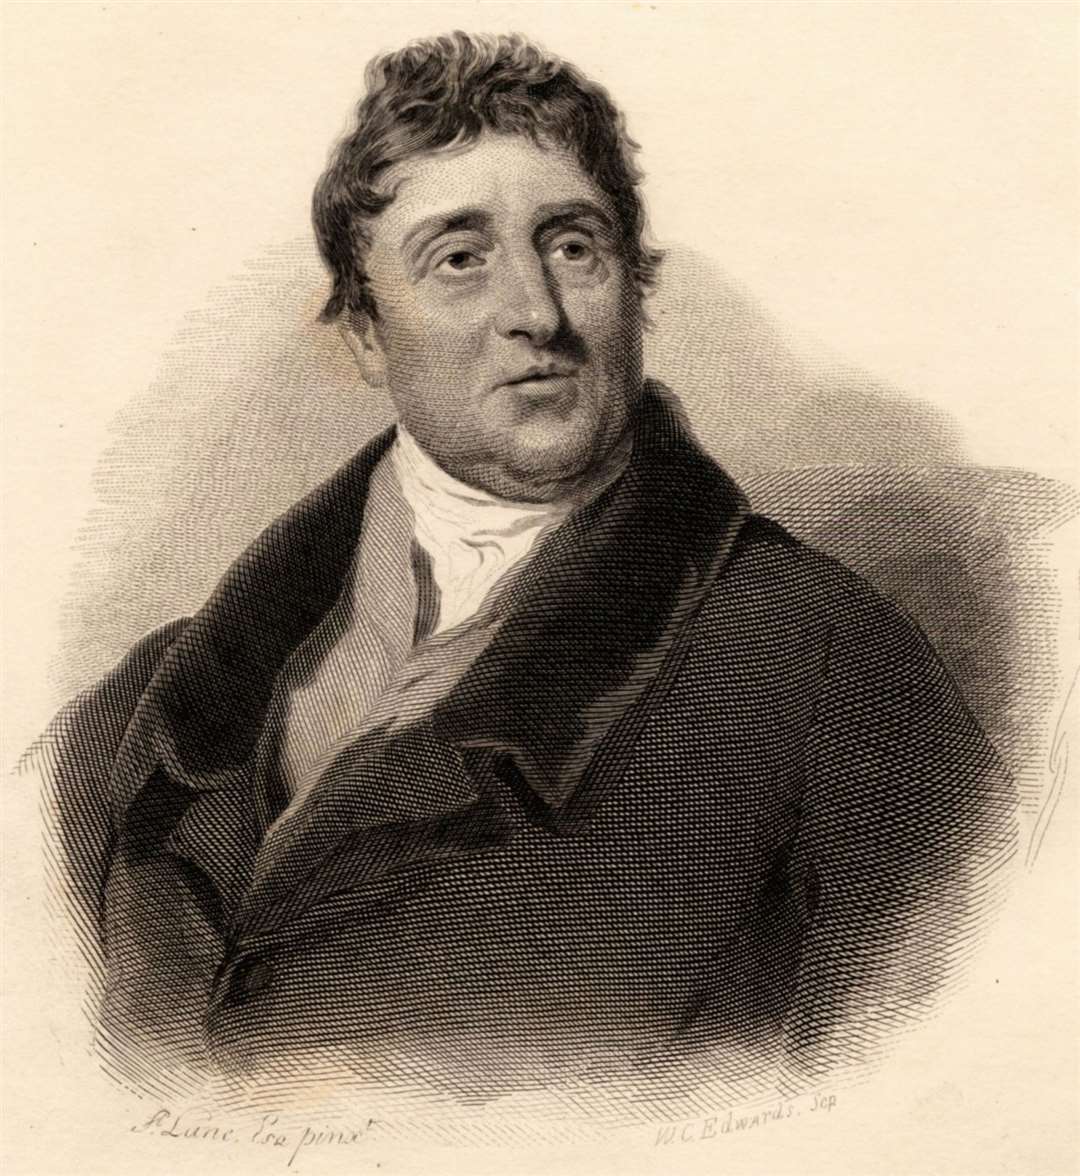 The book shows Thomas Telford to have been a fully rounded character with a love of poetry and the natural world.